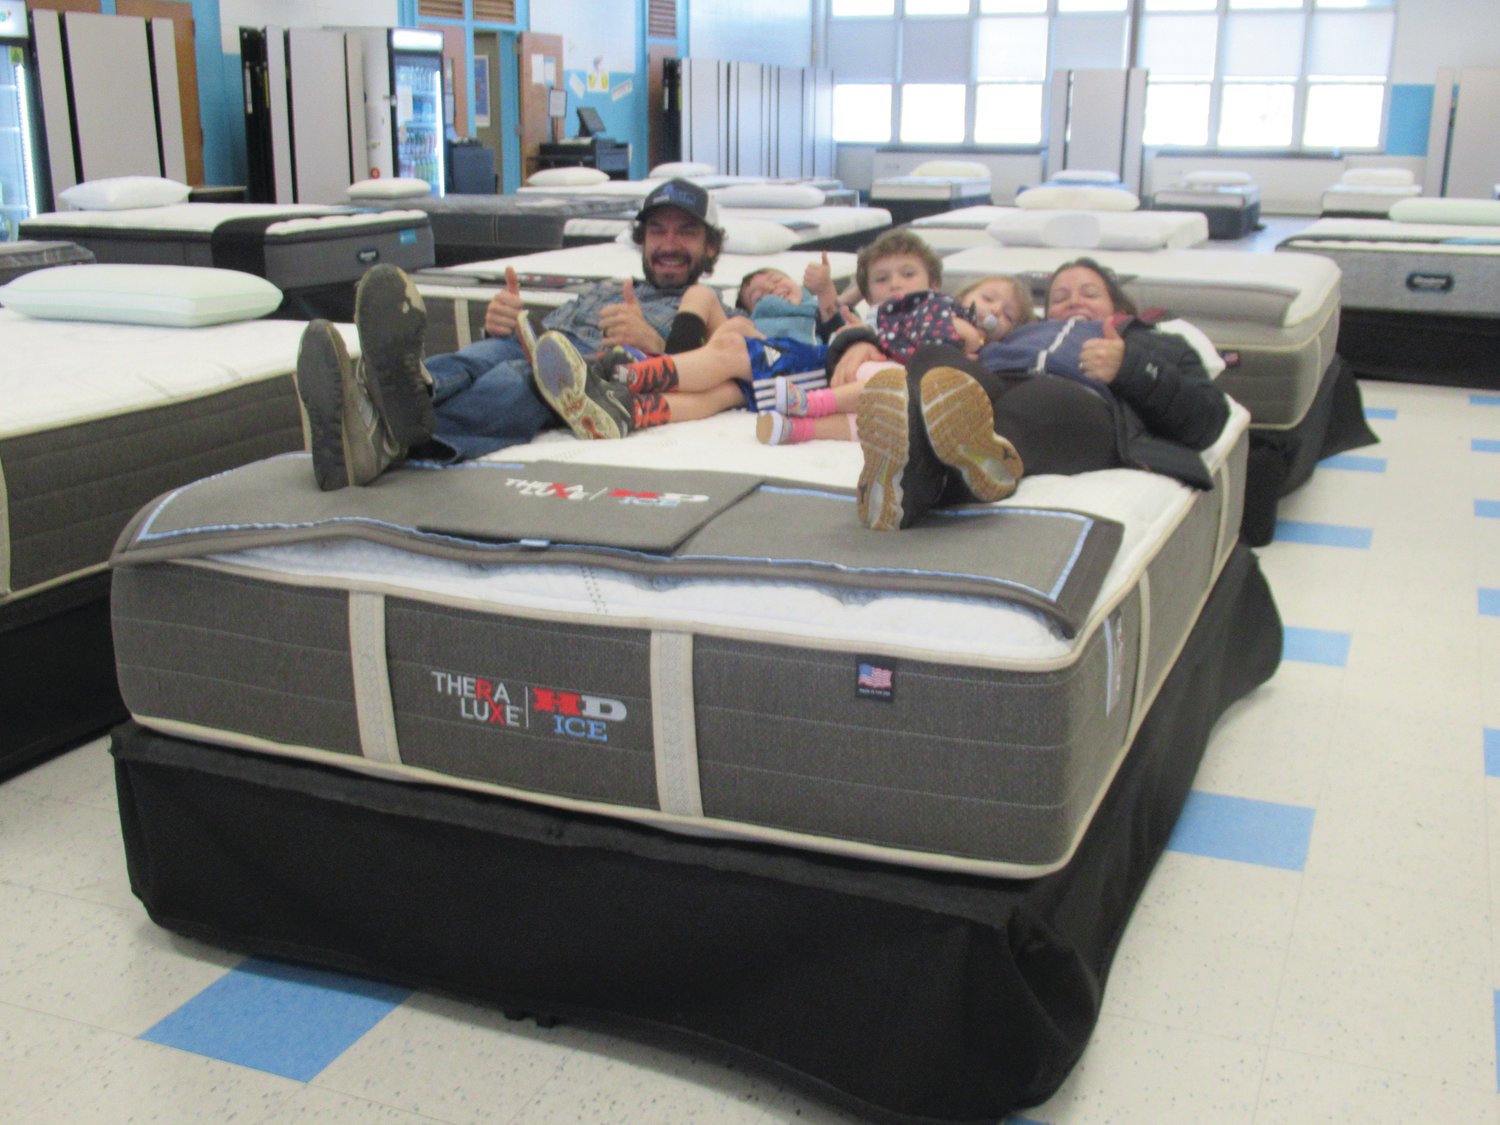 FIRM FUN: The Oakley family from Narragansett — Justin, Jamie, Zach, Miles and Fiona — offered a thumbs about this mattress they tried out Saturday during the JHS Music Department’s 5th Annual Mattress Sale.